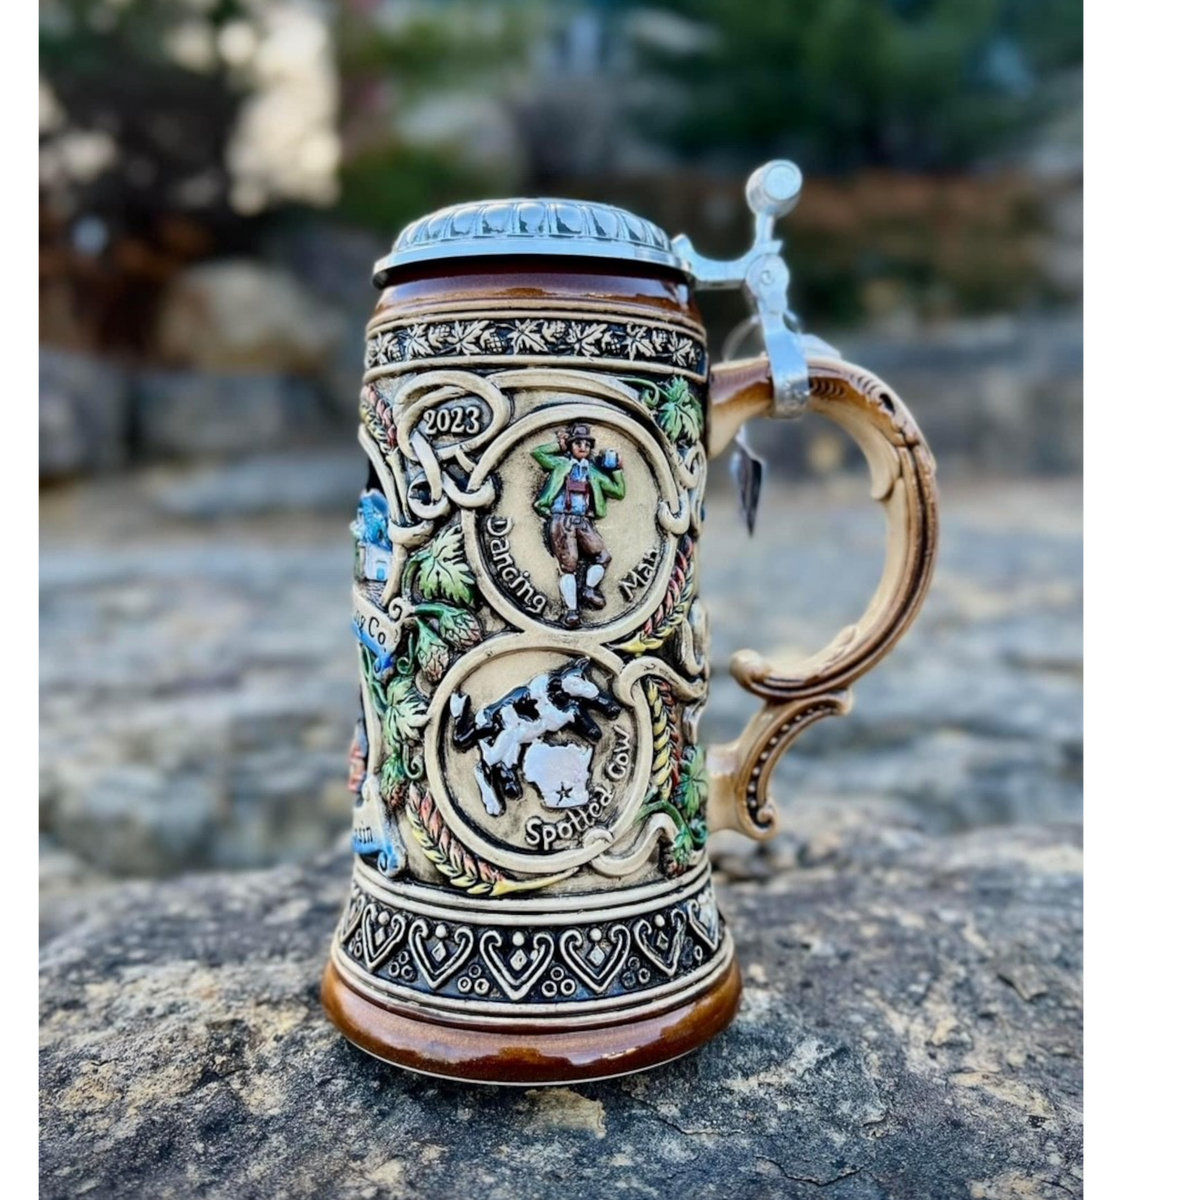 Side of the German Stein with a relief of the Dancing Man logo and the Spotted Cow logo.